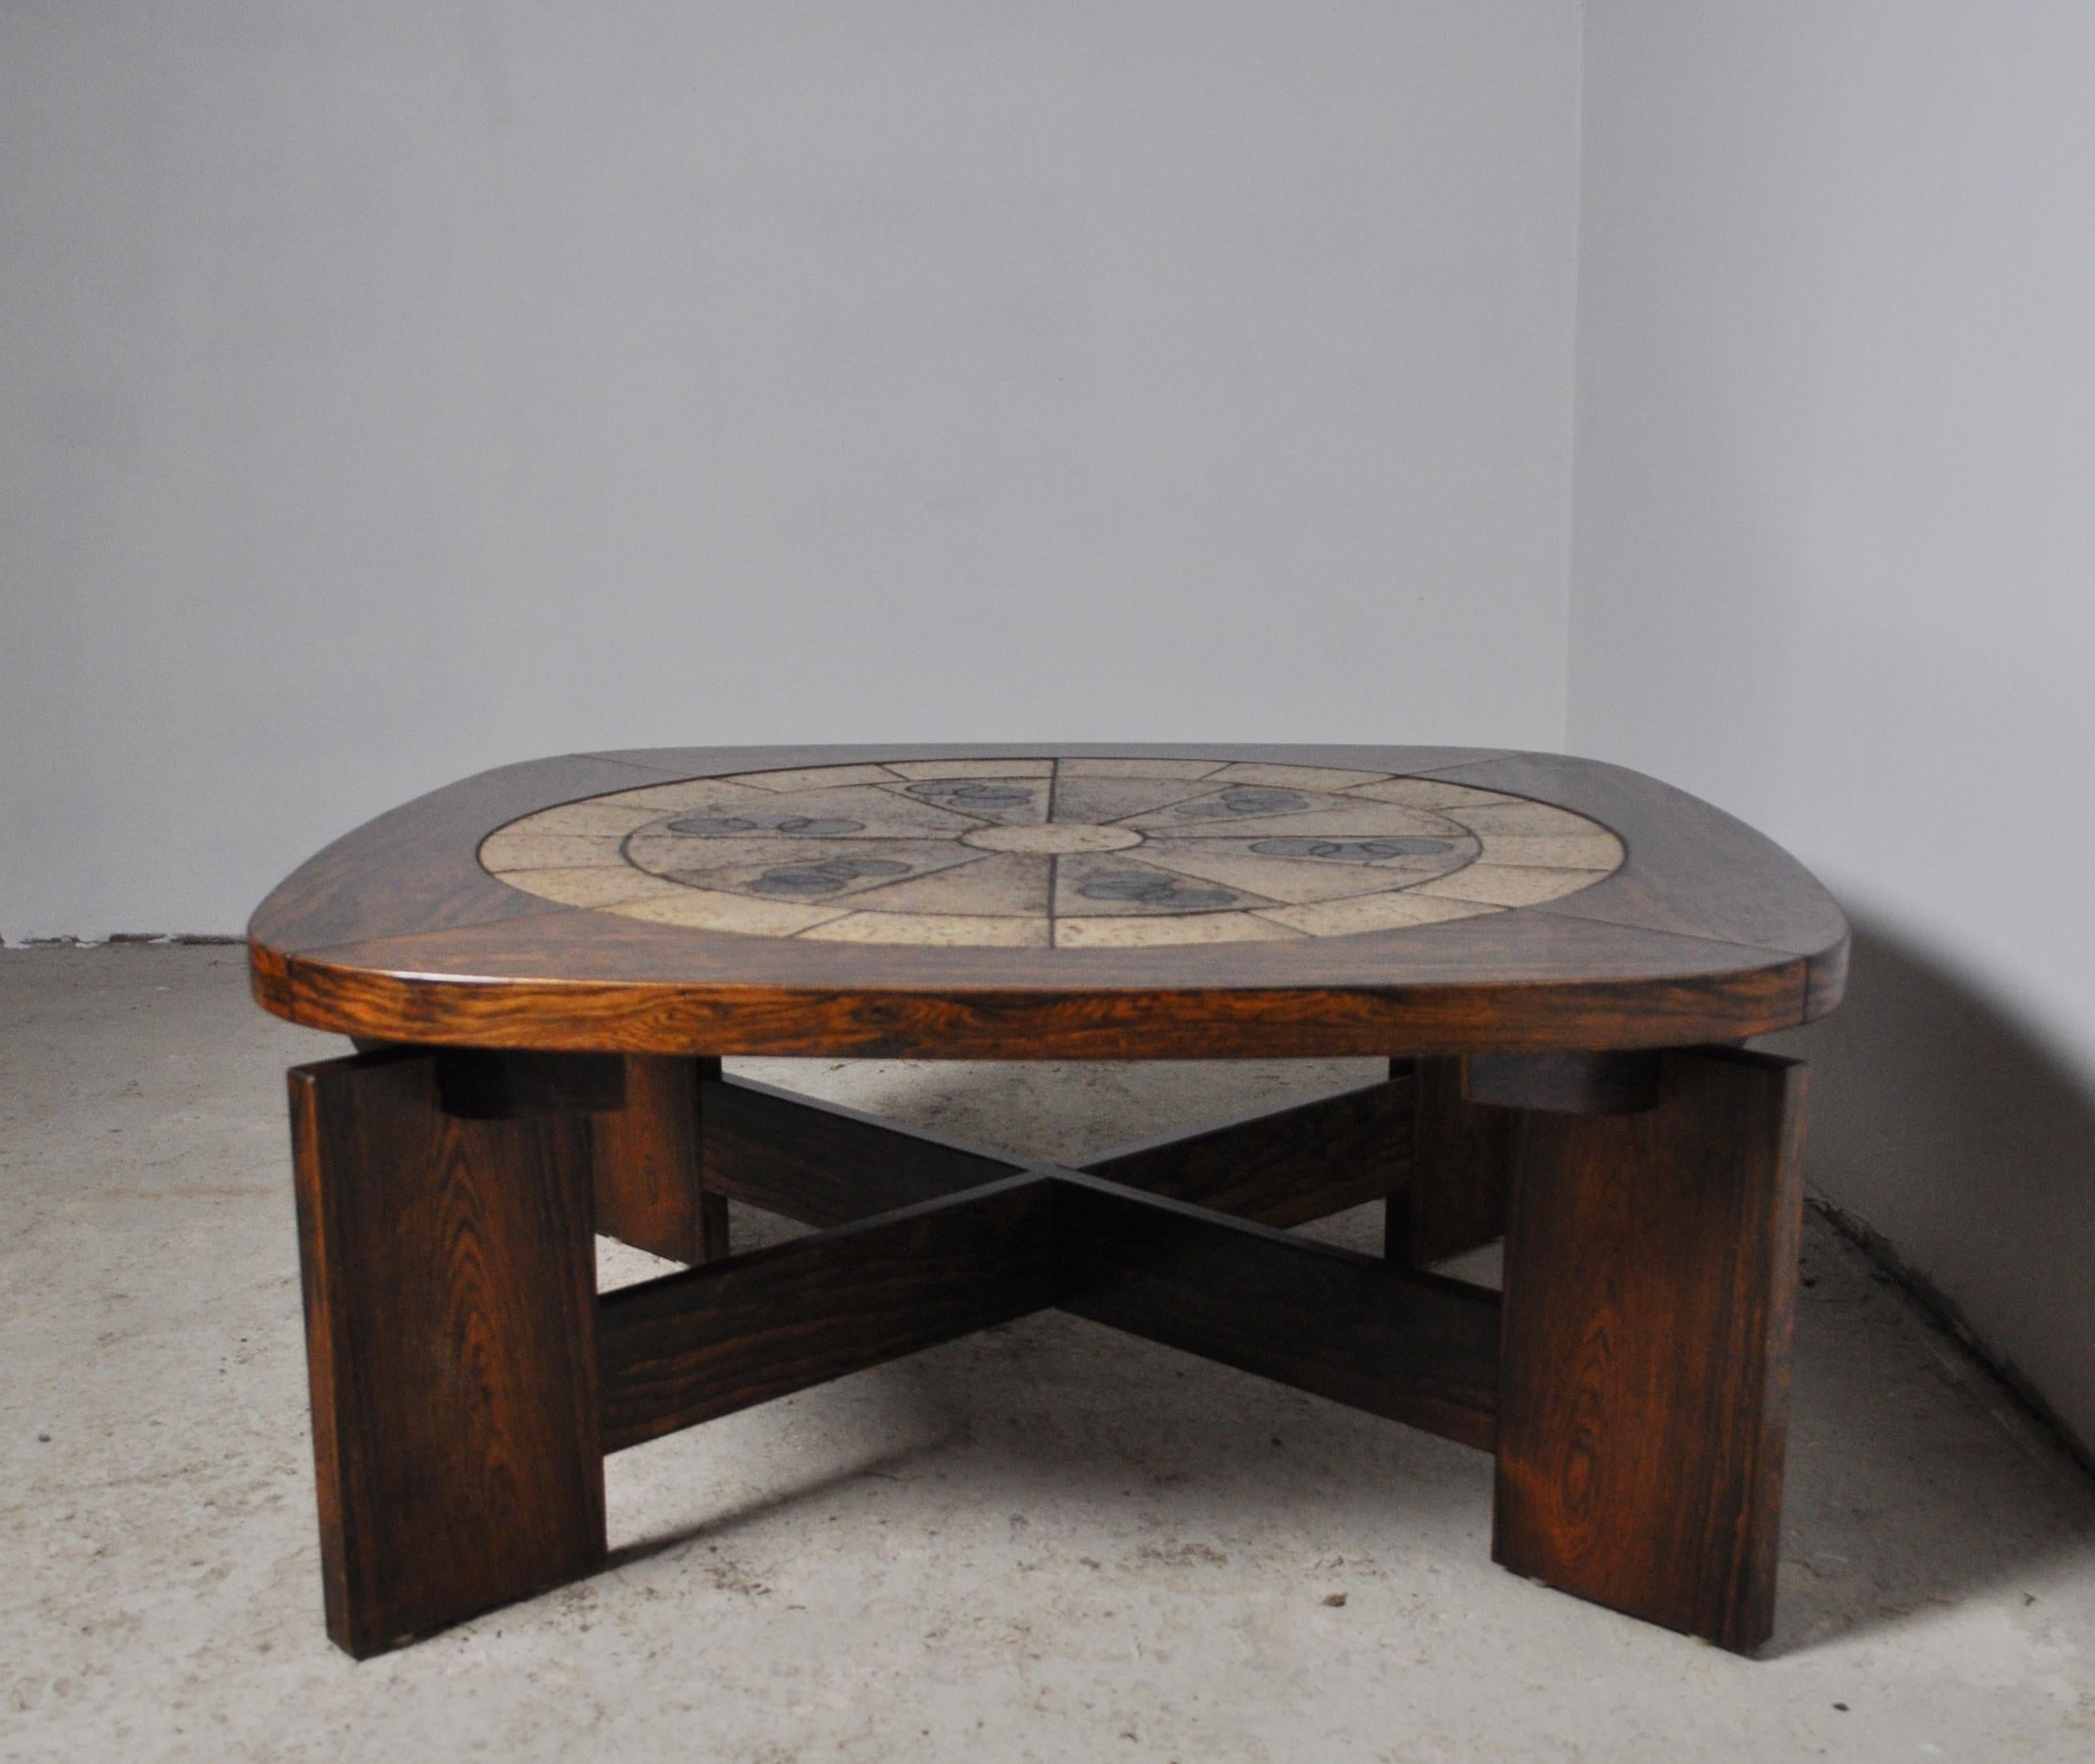 20th Century Rosewood Coffee Table with Ceramic Tiles, 1970s For Sale